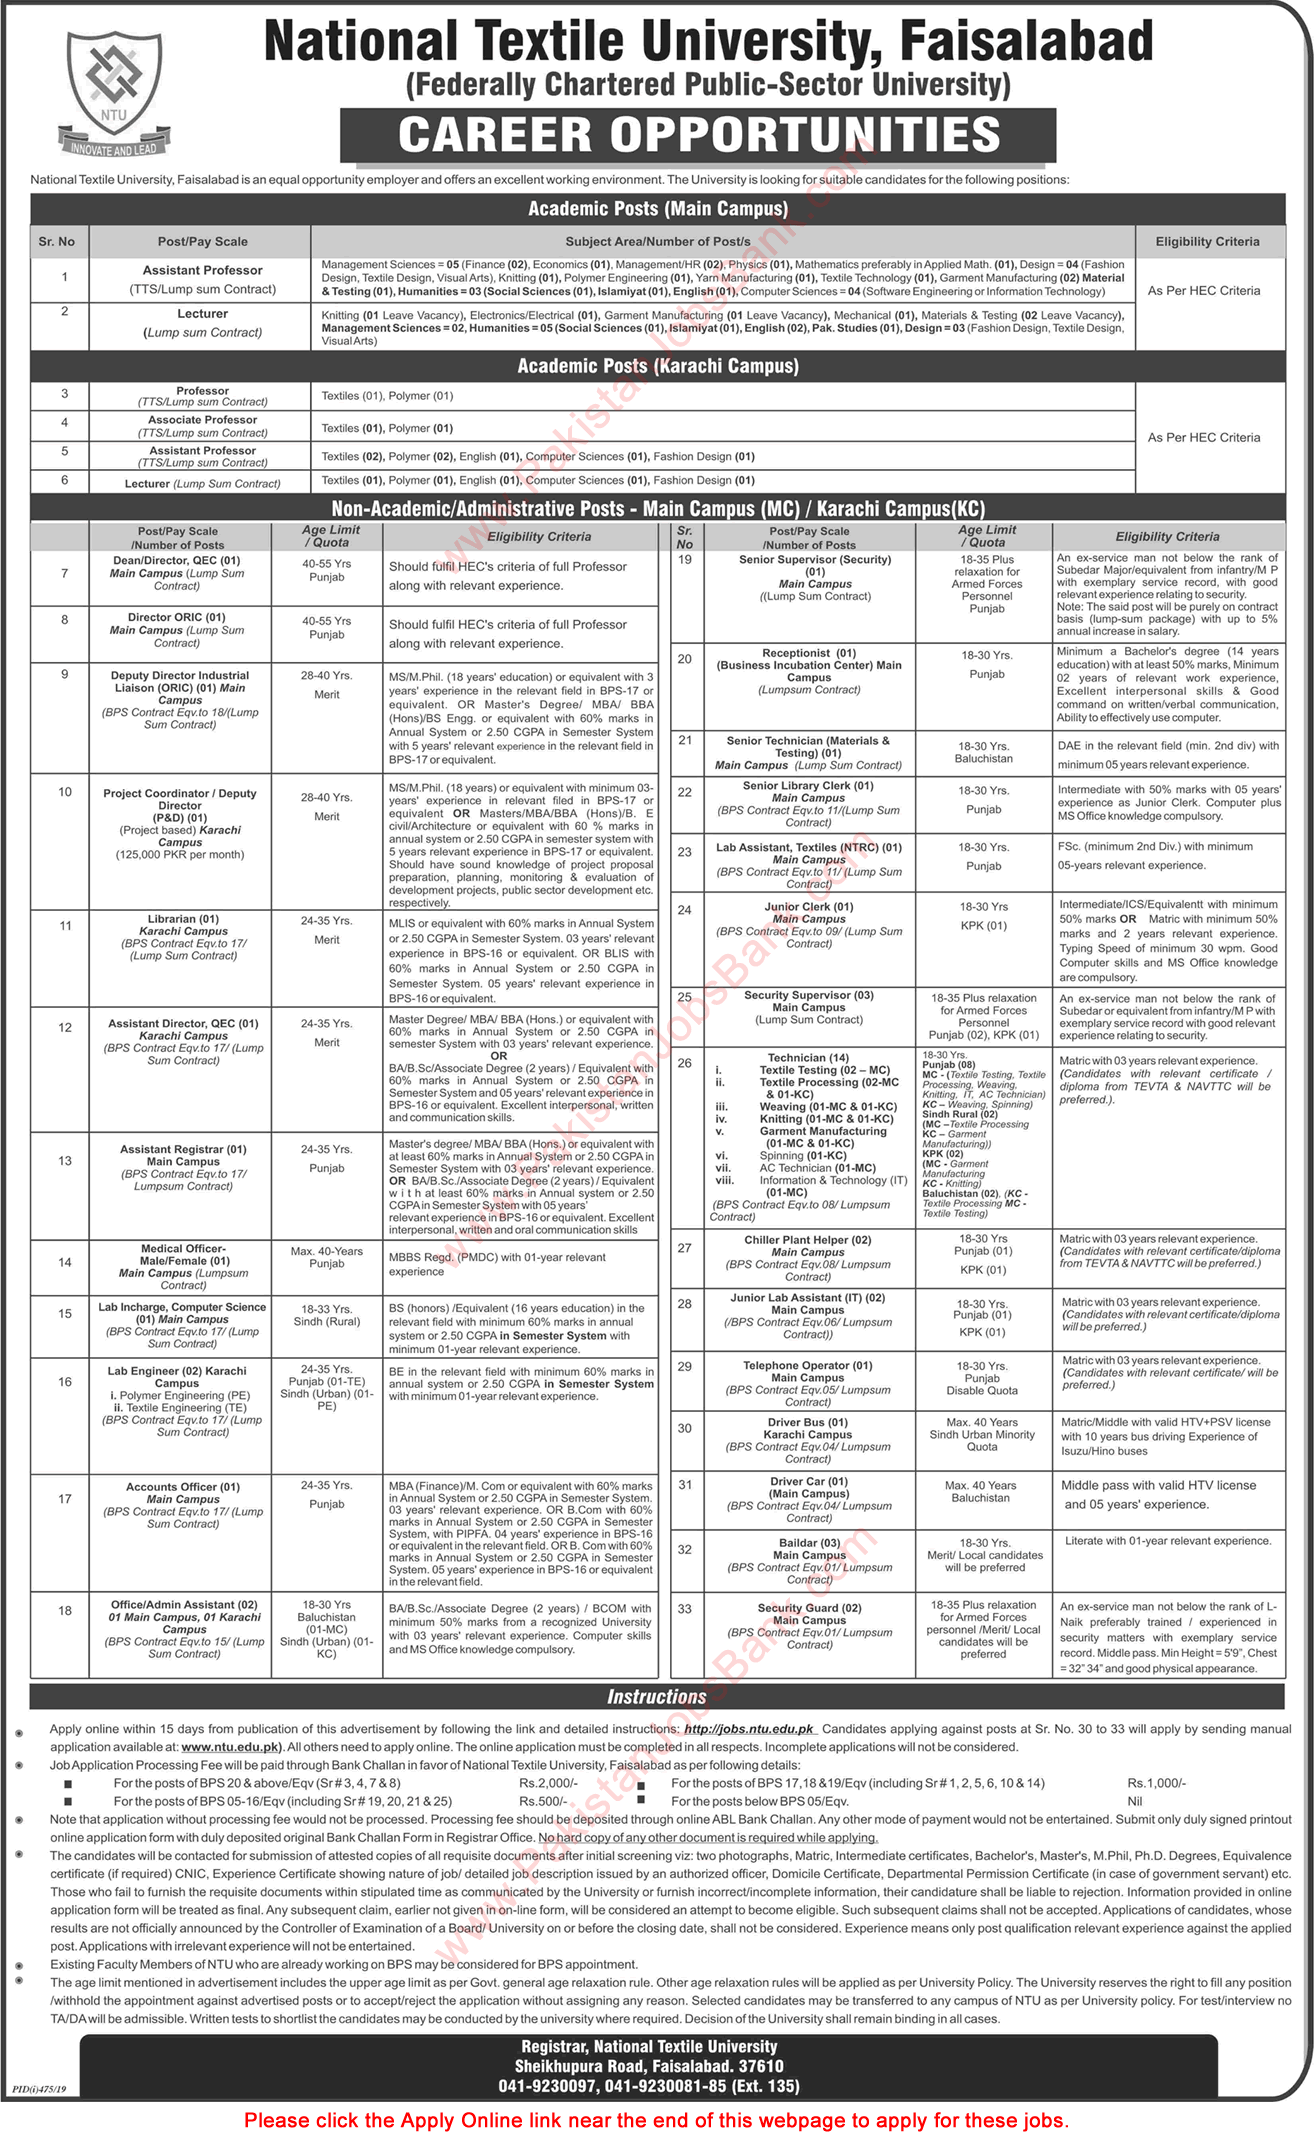 National Textile University Faisalabad Jobs 2019 July Apply Online Teaching Faculty, Technicians & Others Latest